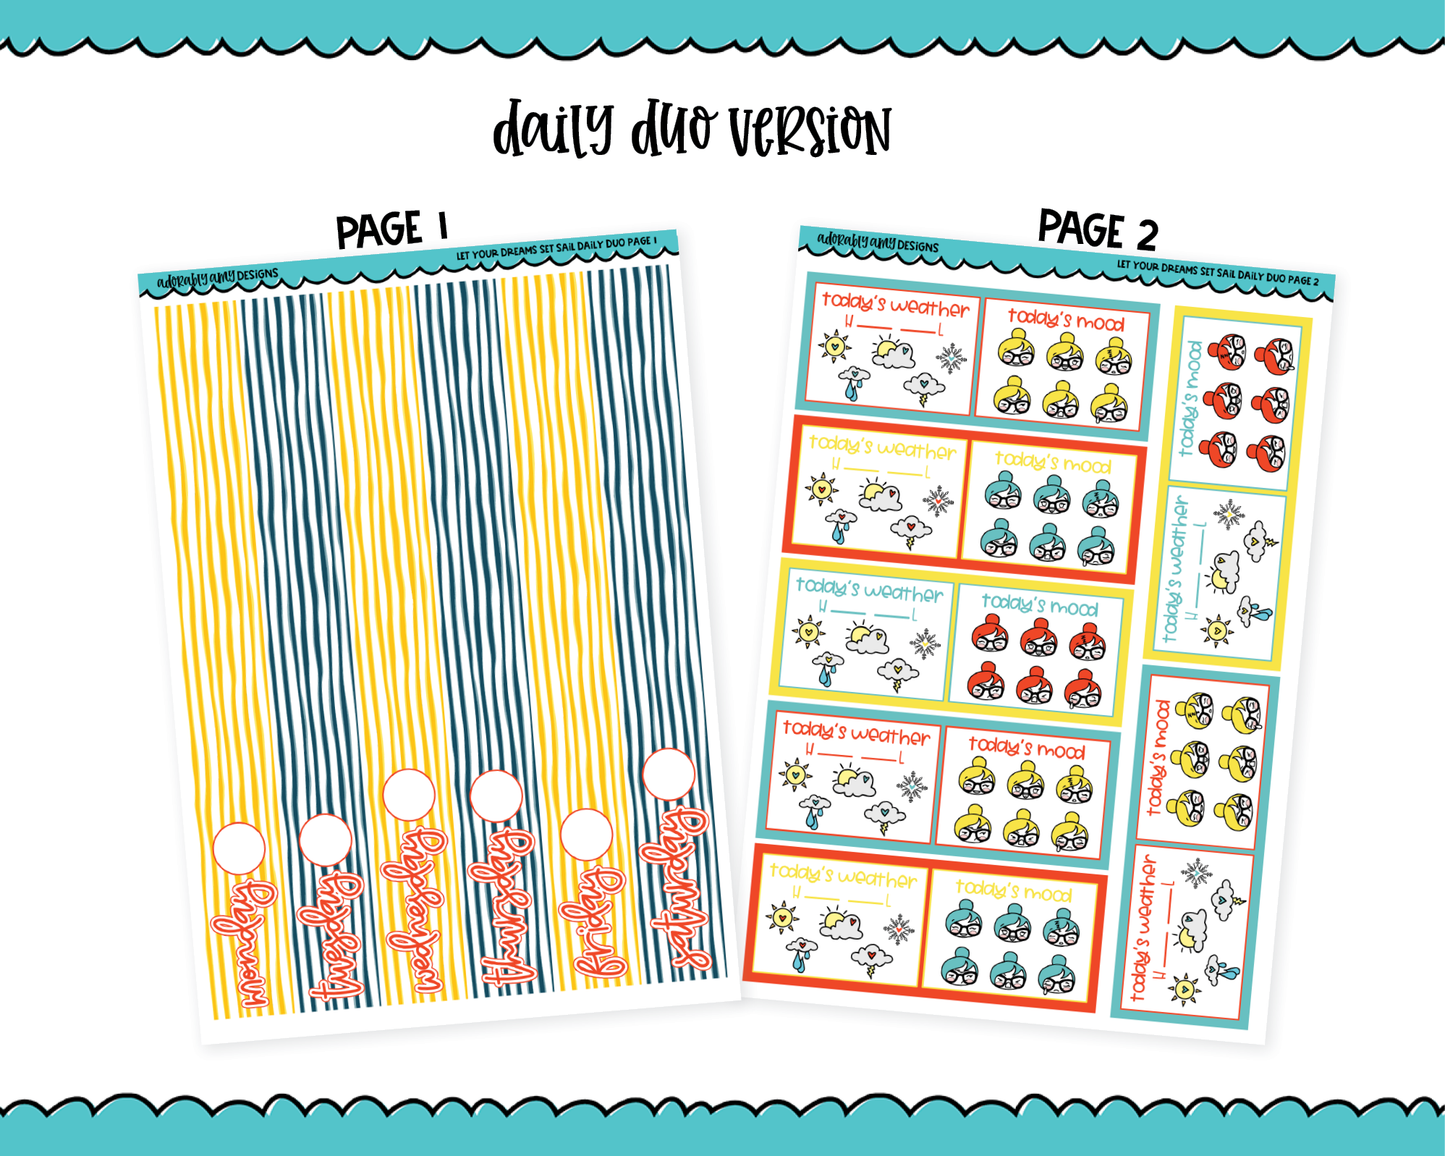 Daily Duo Let Your Dreams Set Sail Themed Weekly Planner Sticker Kit for Daily Duo Planner